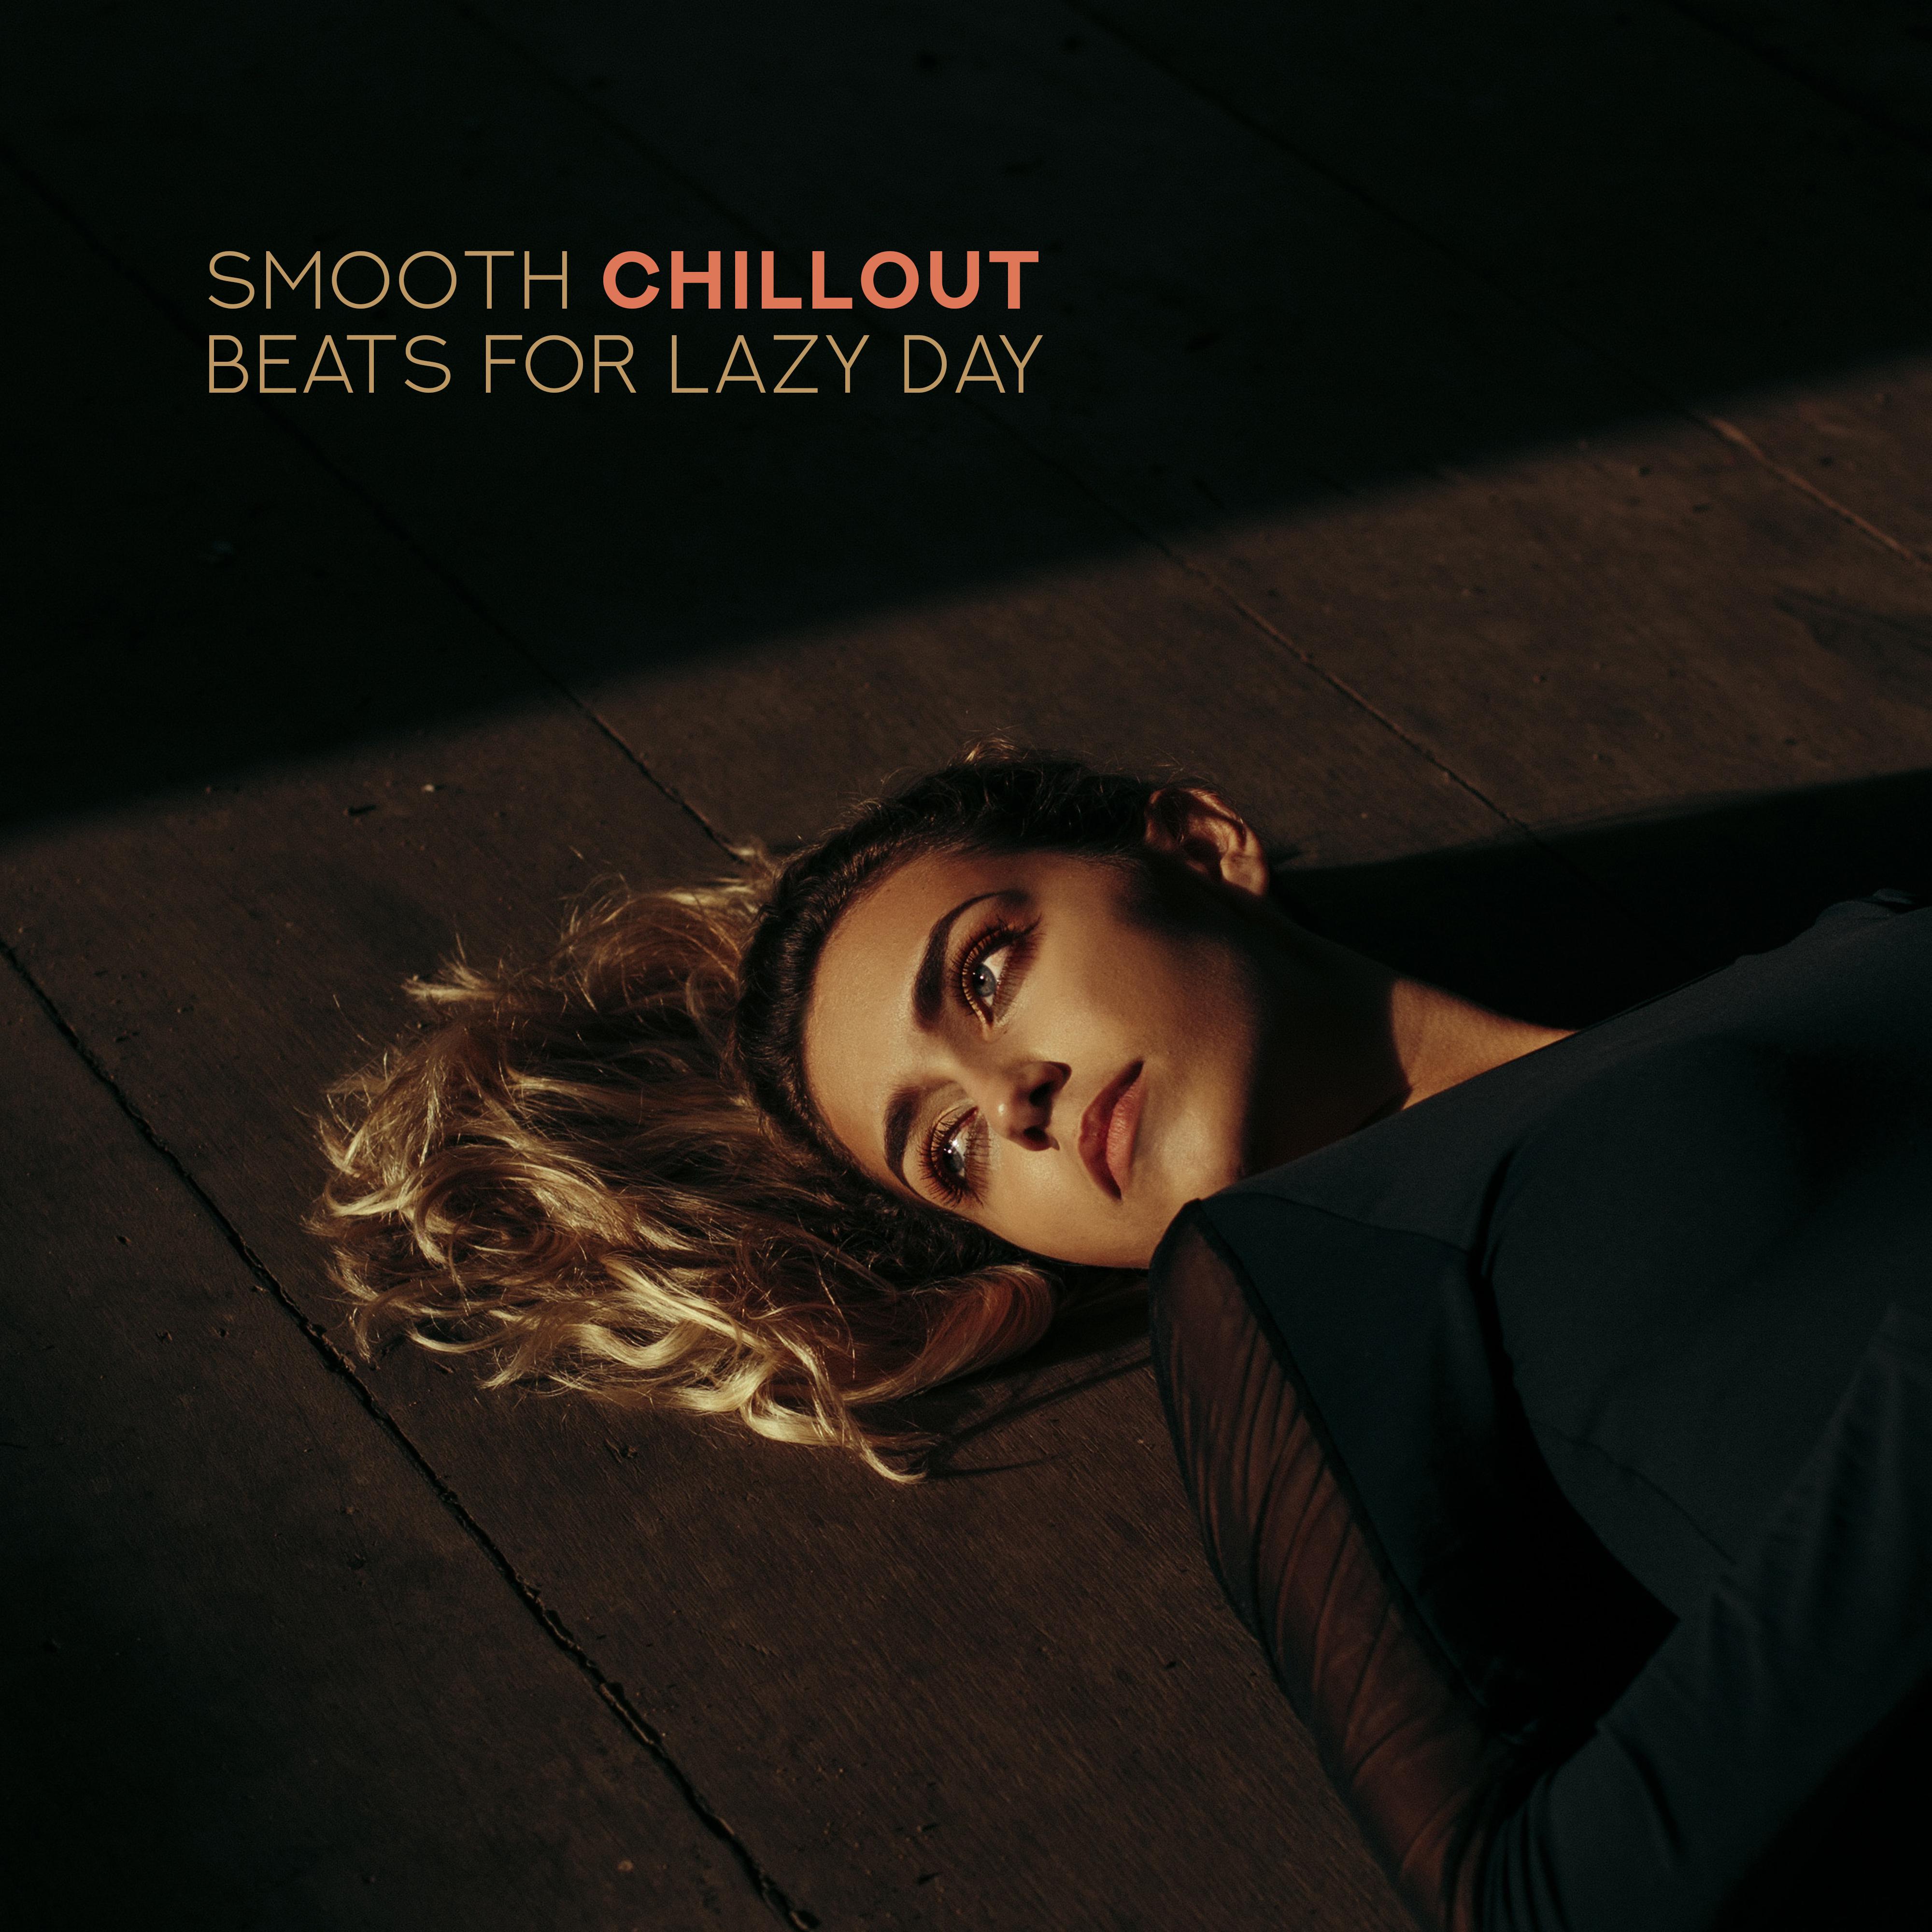 Smooth Chillout Beats for Lazy Day